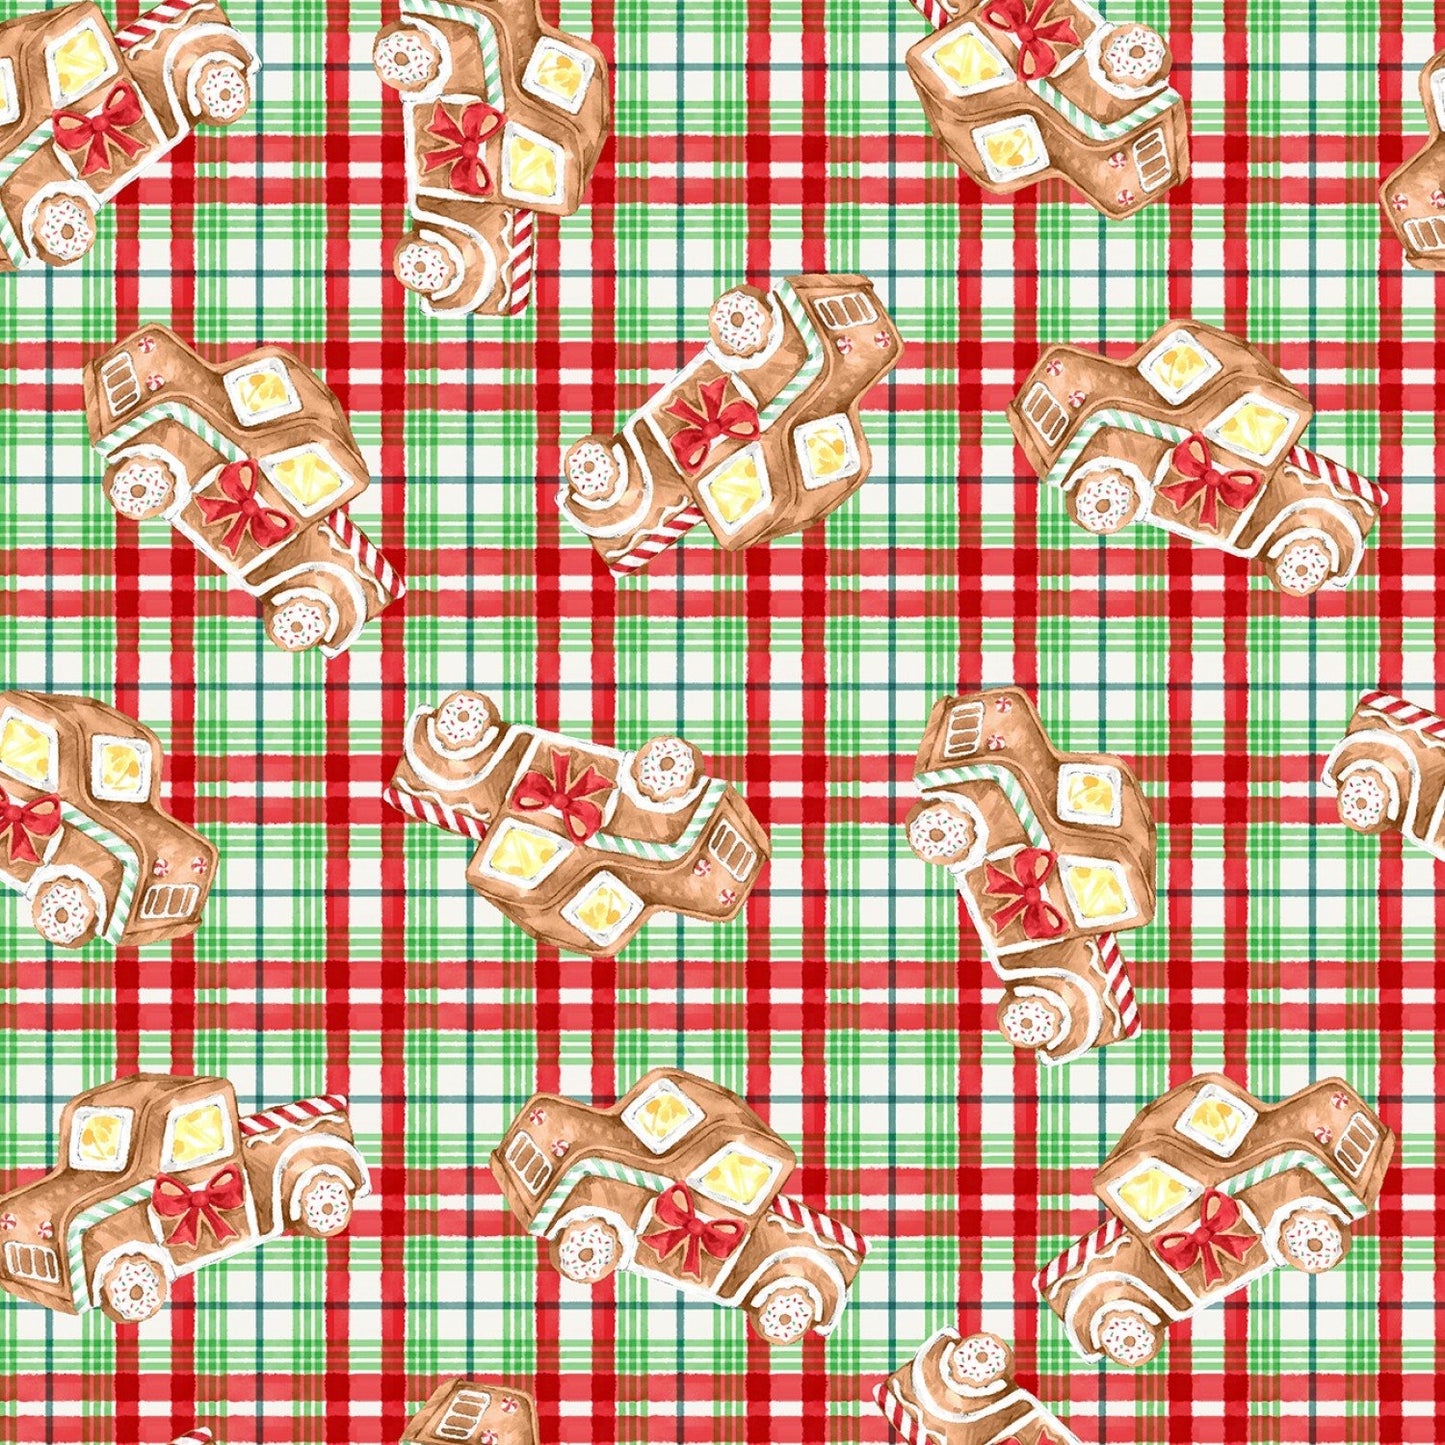 Gingerneering Fabric - Ginger Plaid - By the yard